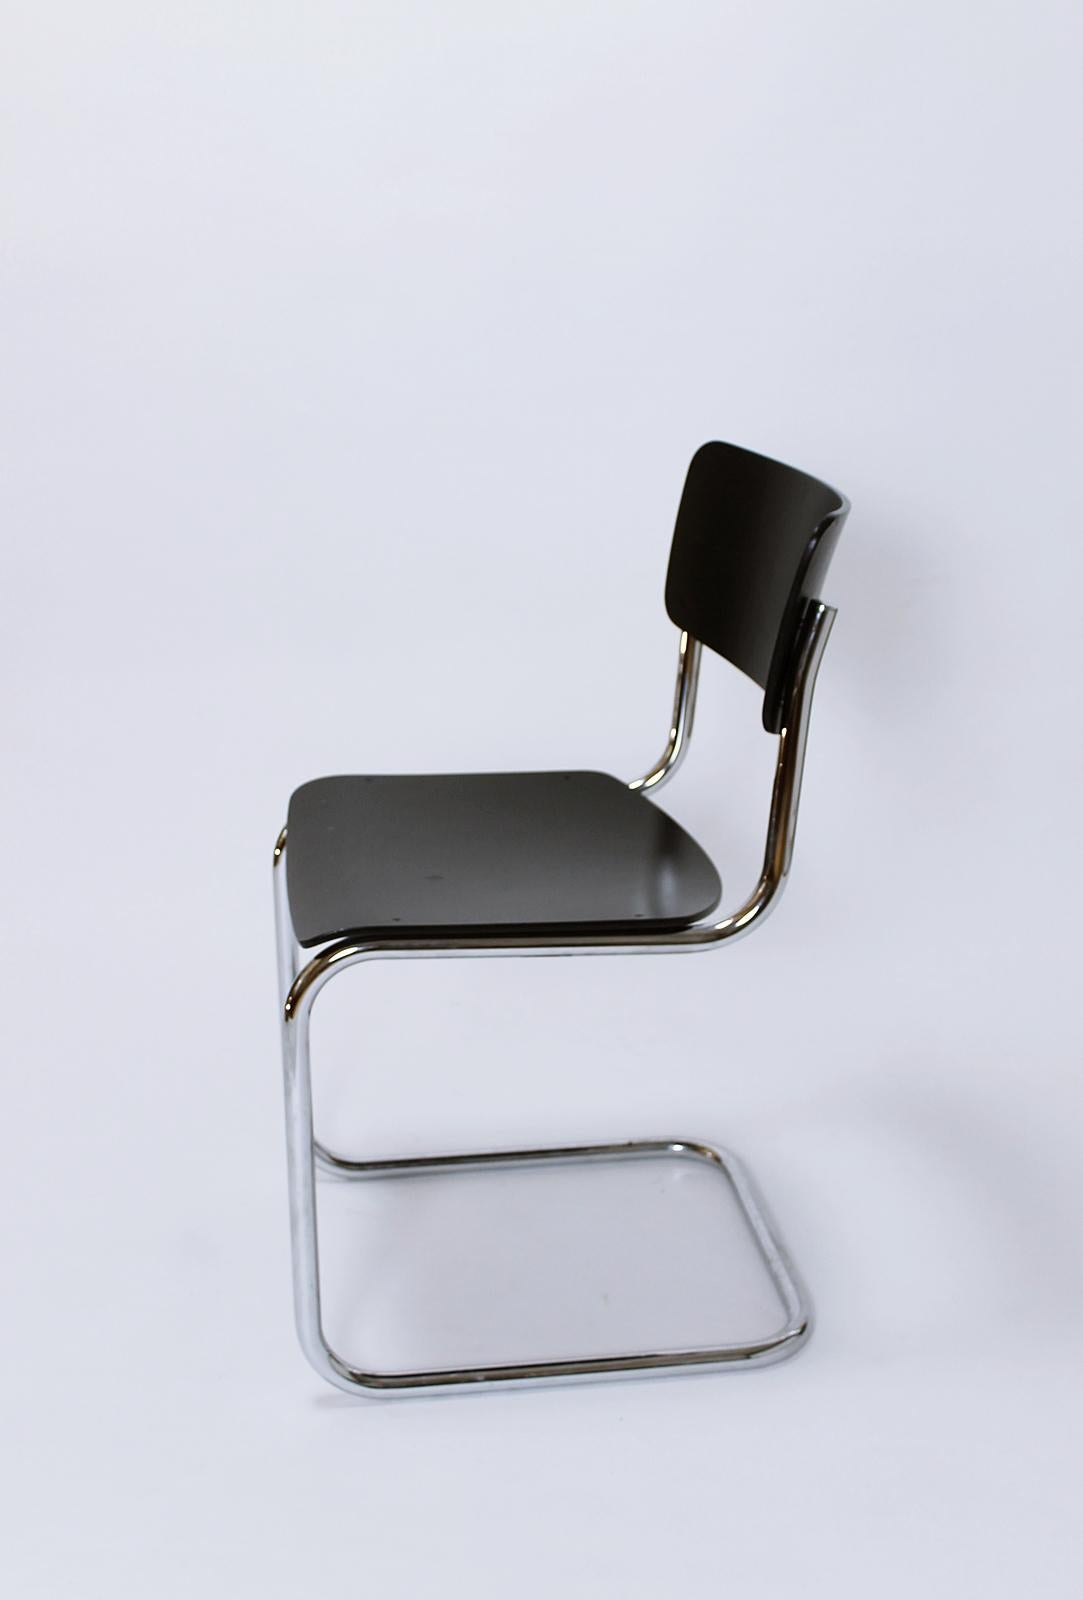 Bauhaus Classic S43 Cantilevered Chair by Mart Stam for Thonet, Germany In Good Condition For Sale In Debrecen-Pallag, HU